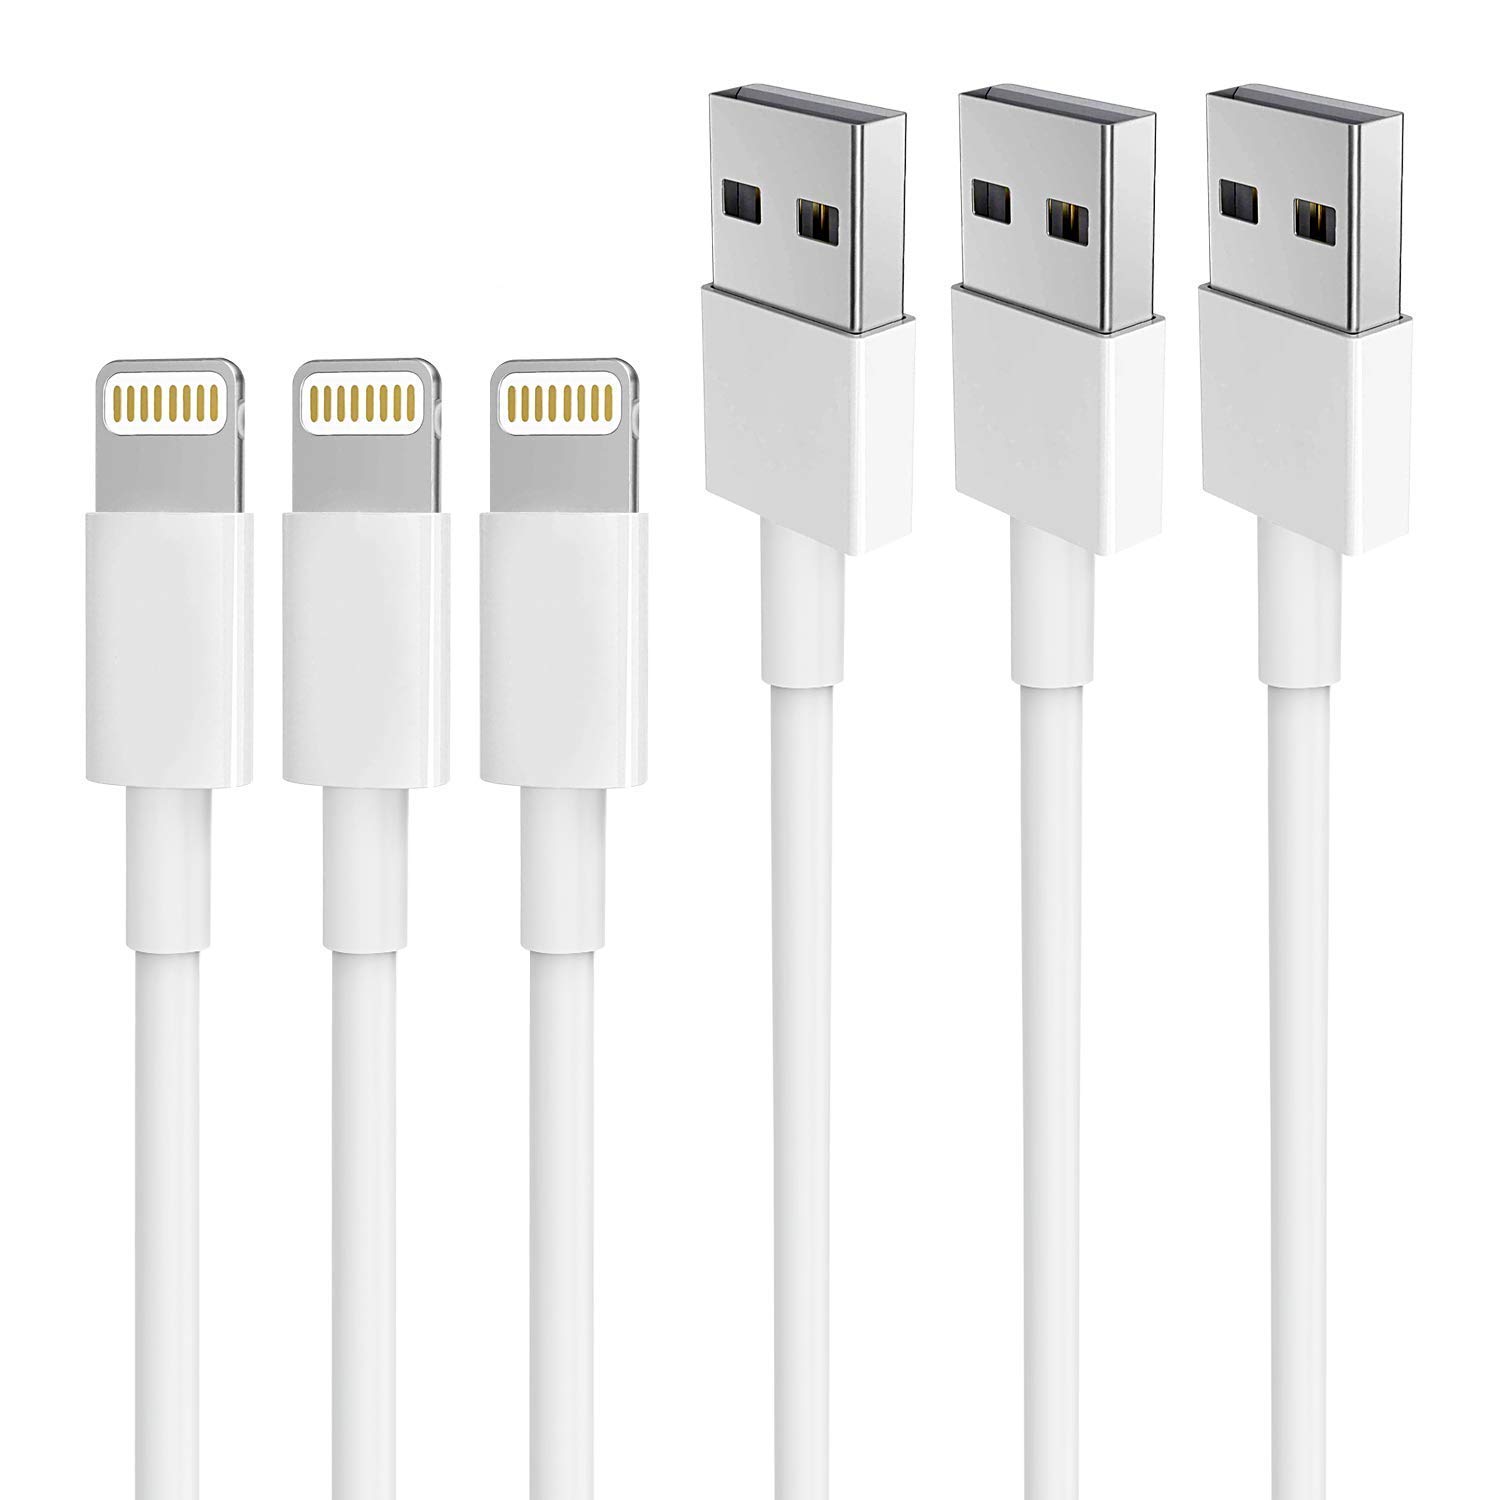 CABEPOW Reinforced iPhone Charger Cords, 3-Pack